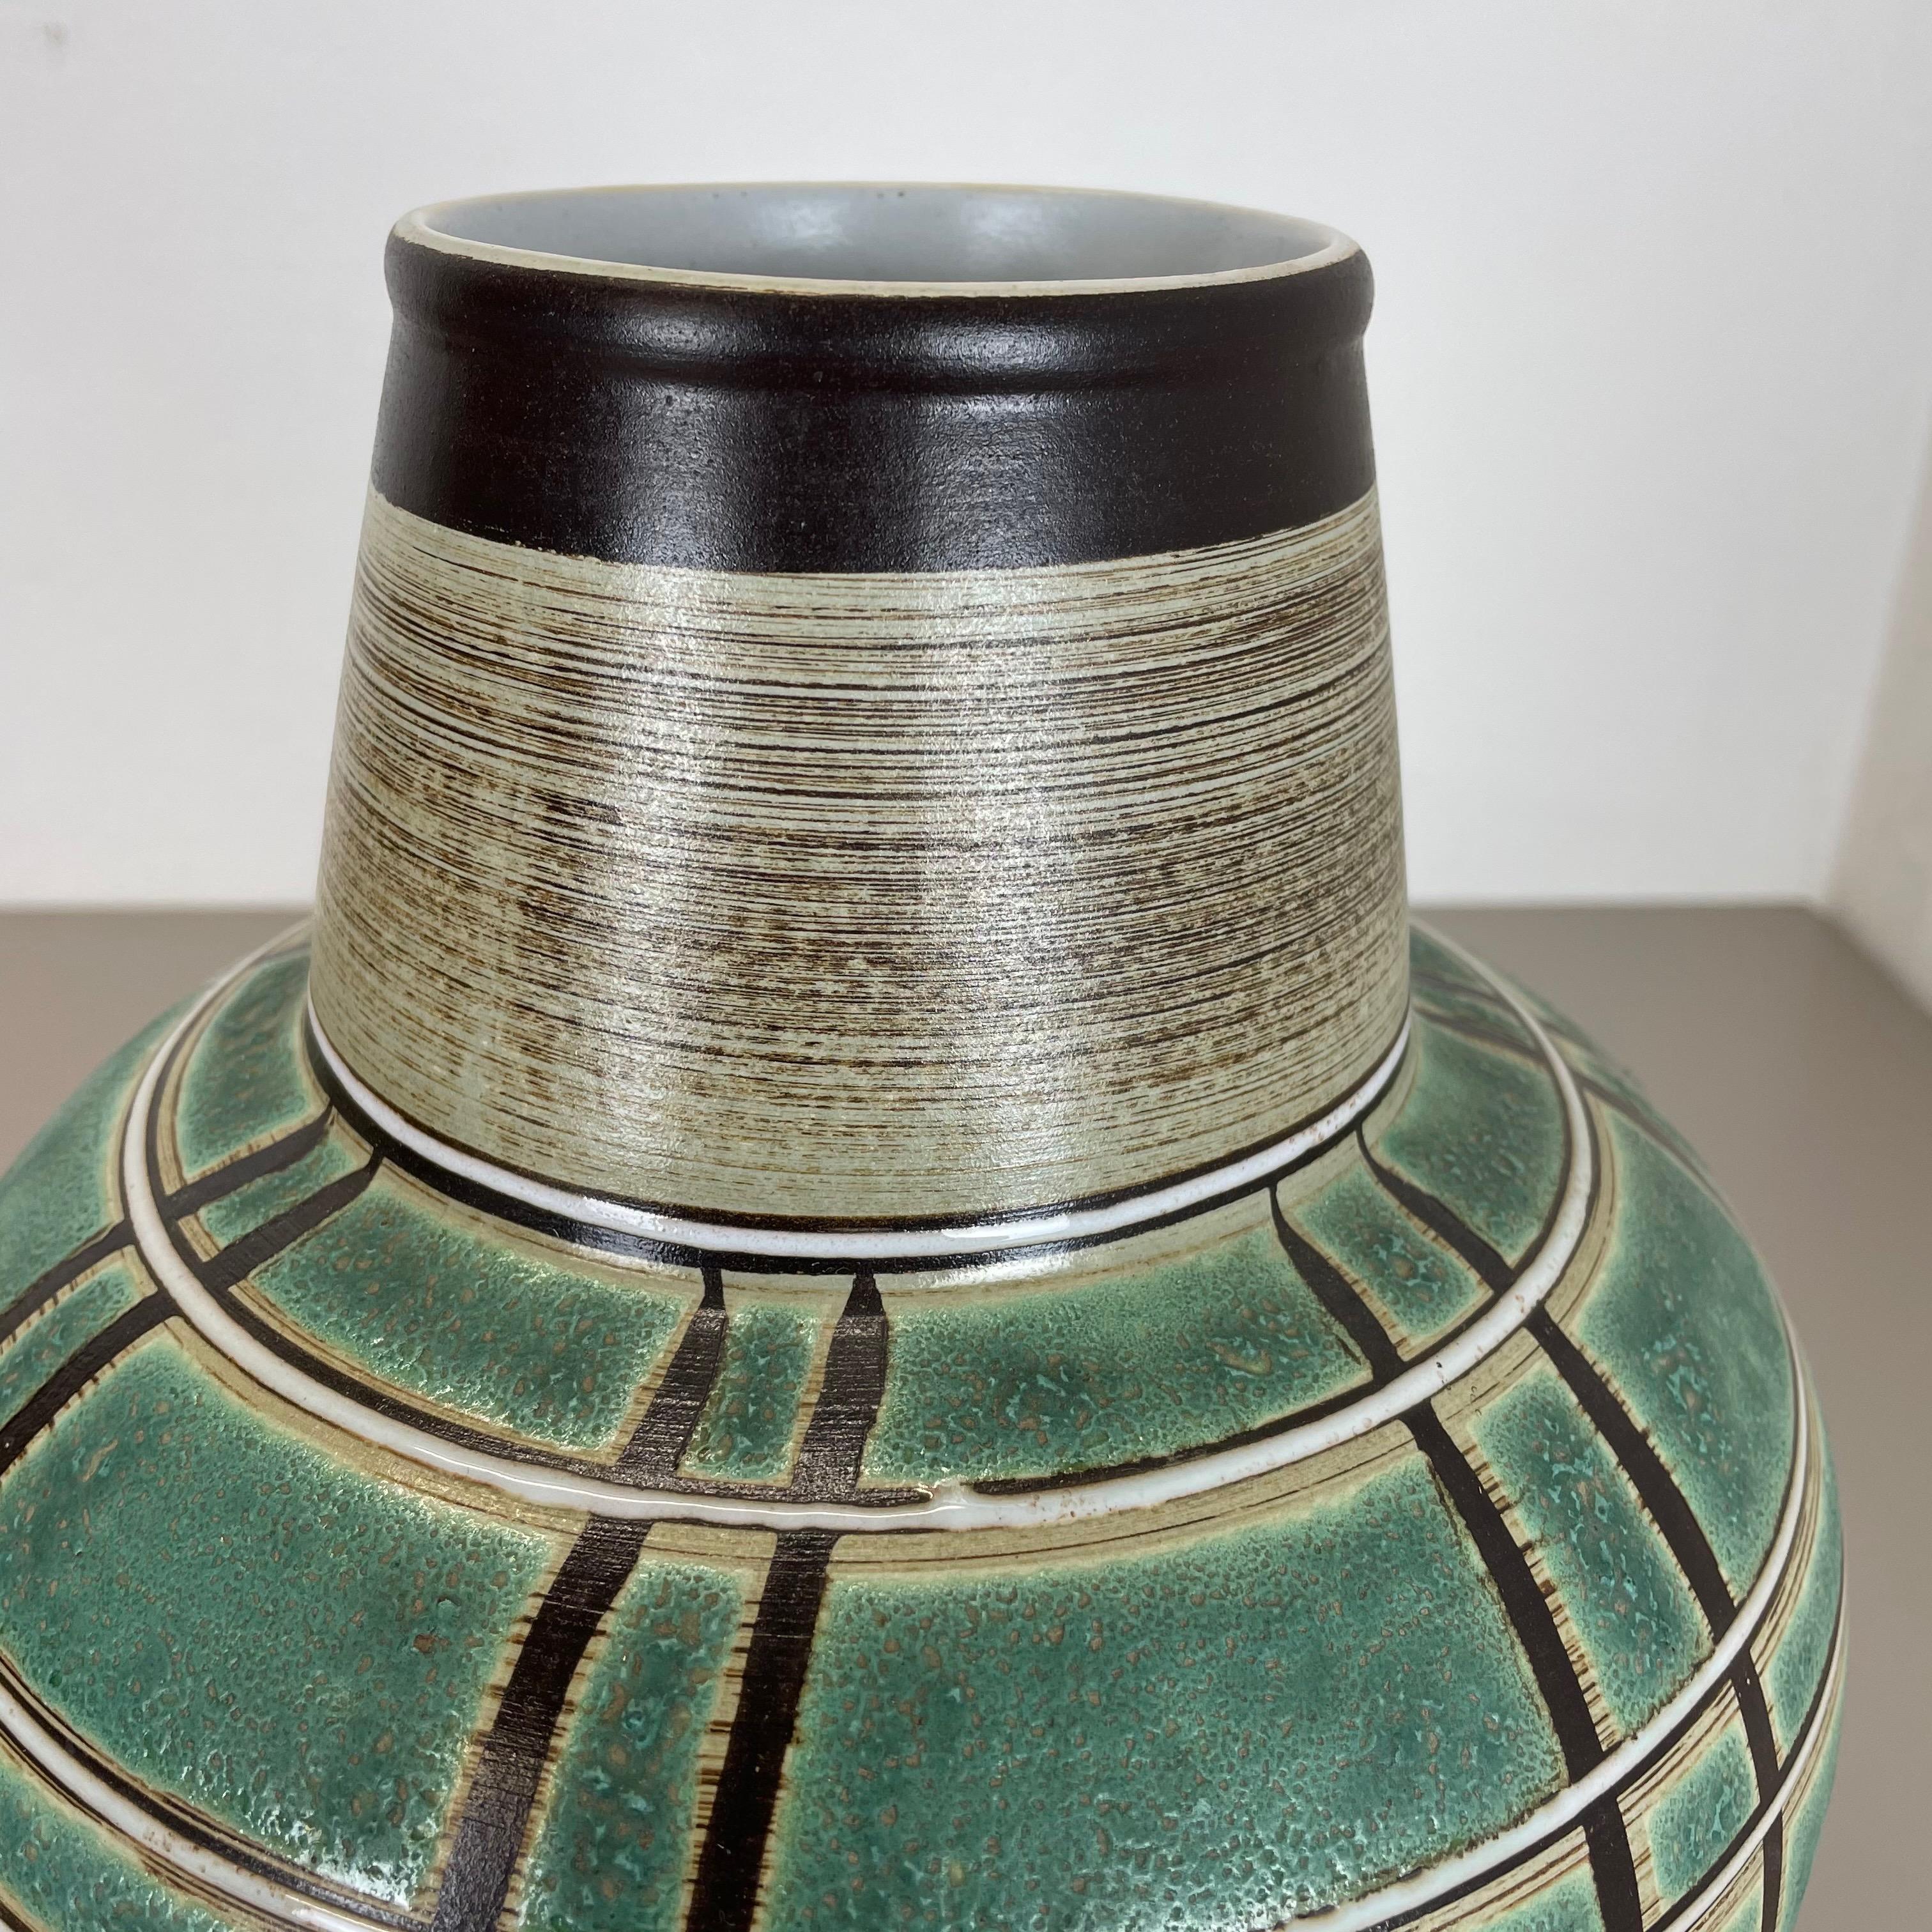 Super Large Ceramic Pottery Floor Vase by Marzi and Remy, Germany, 1960s For Sale 1